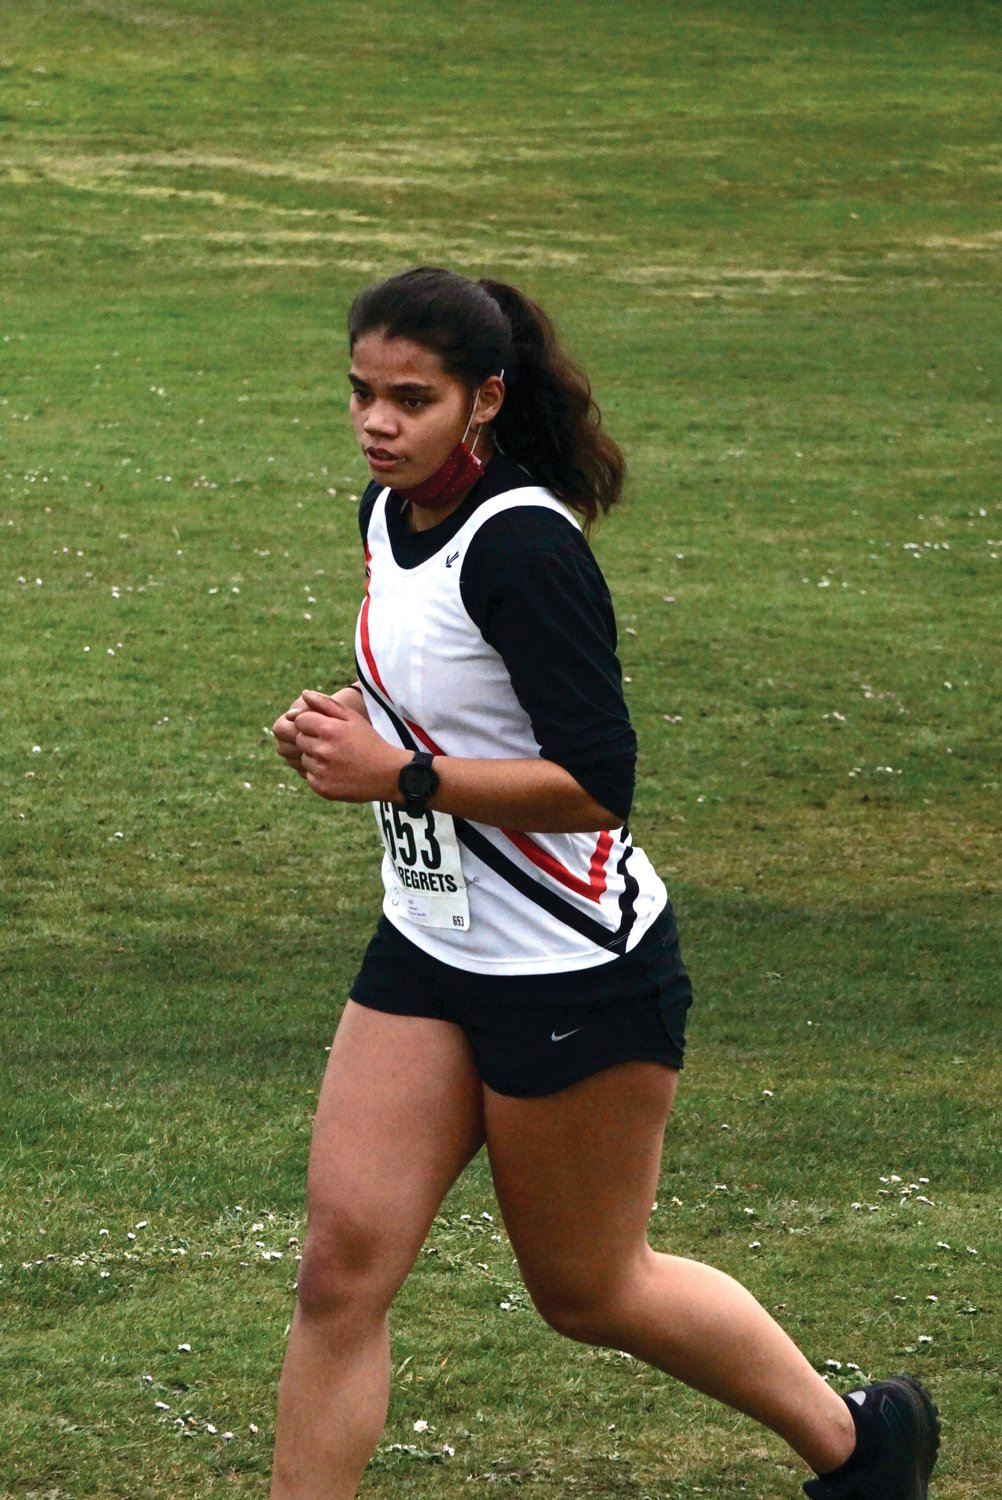 Freshman Aliyah Yearian keeps the pace as she runs for the East Jefferson cross country team at the Port Townsend Golf Course.